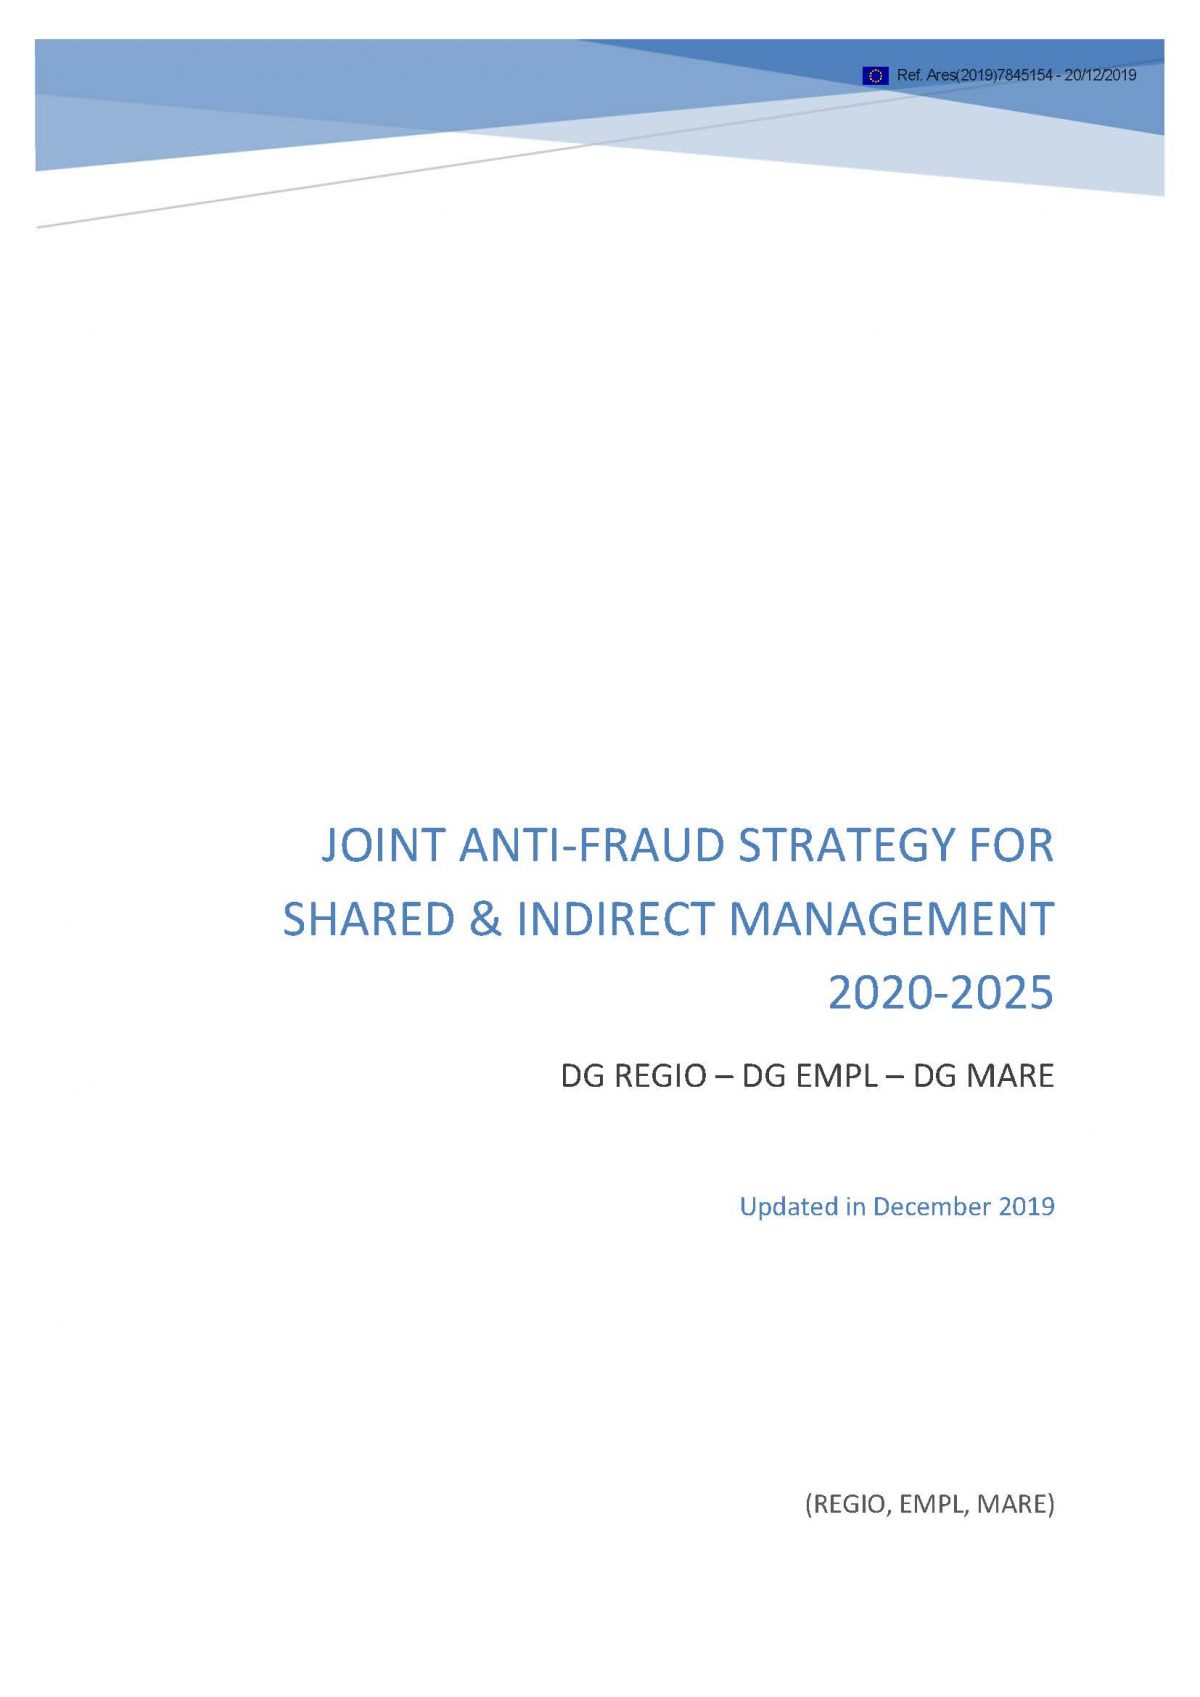 Joint anti-fraud strategy for shared & indirect management 2020-2025